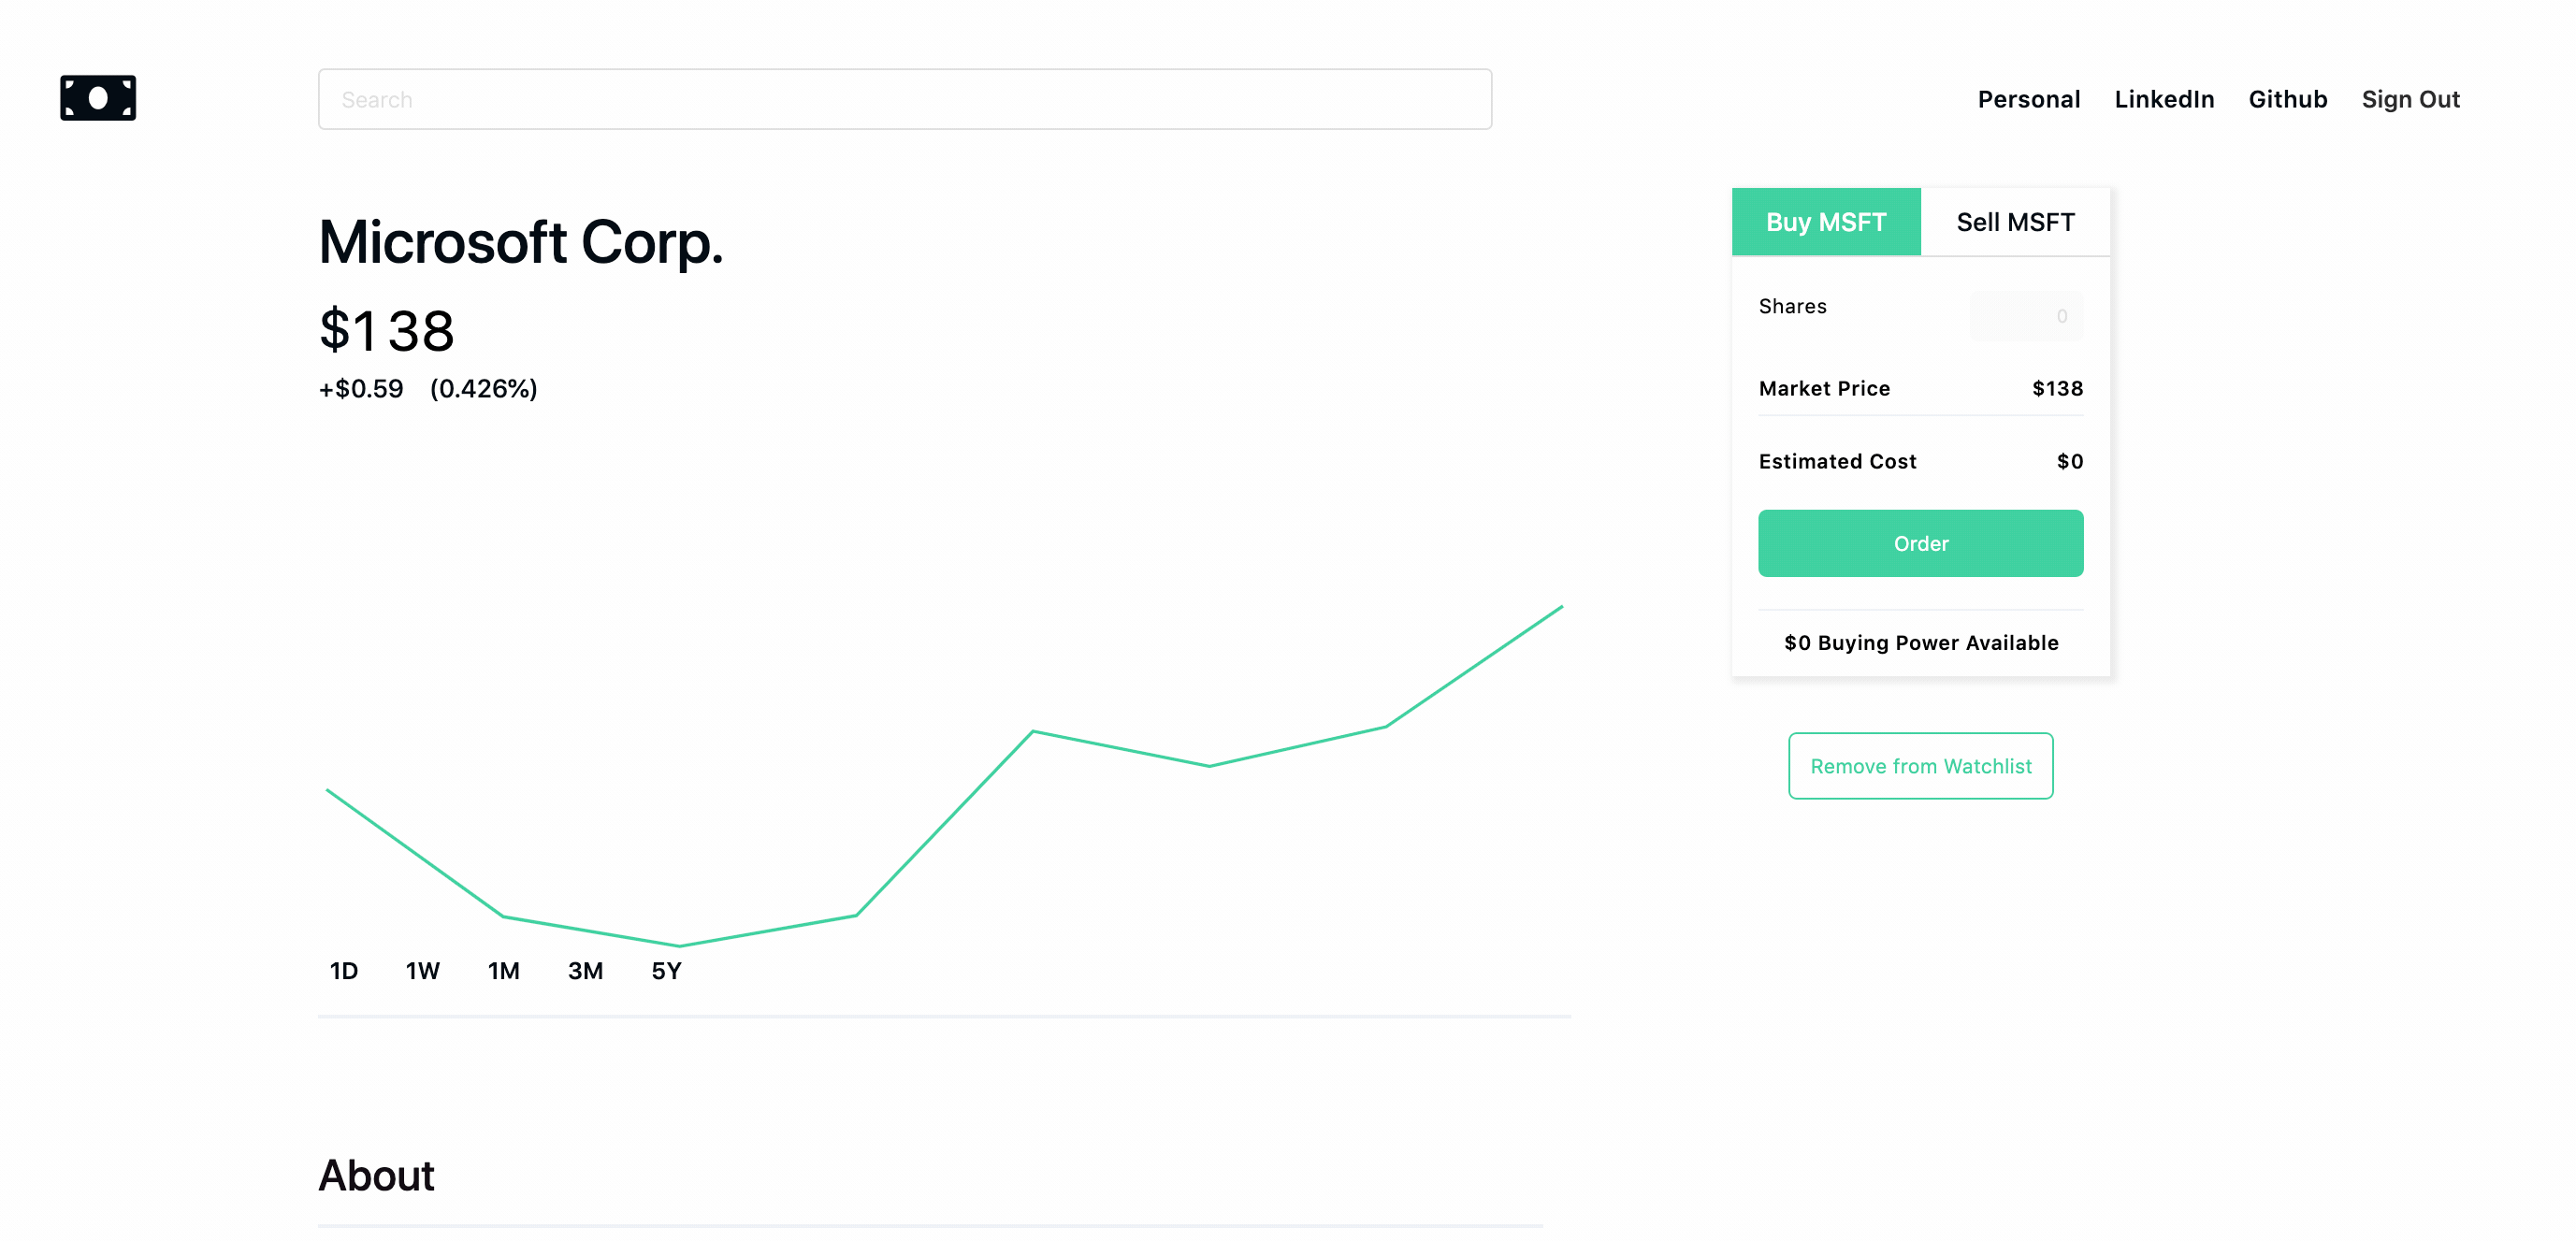 Company show page with stock performance on line graph